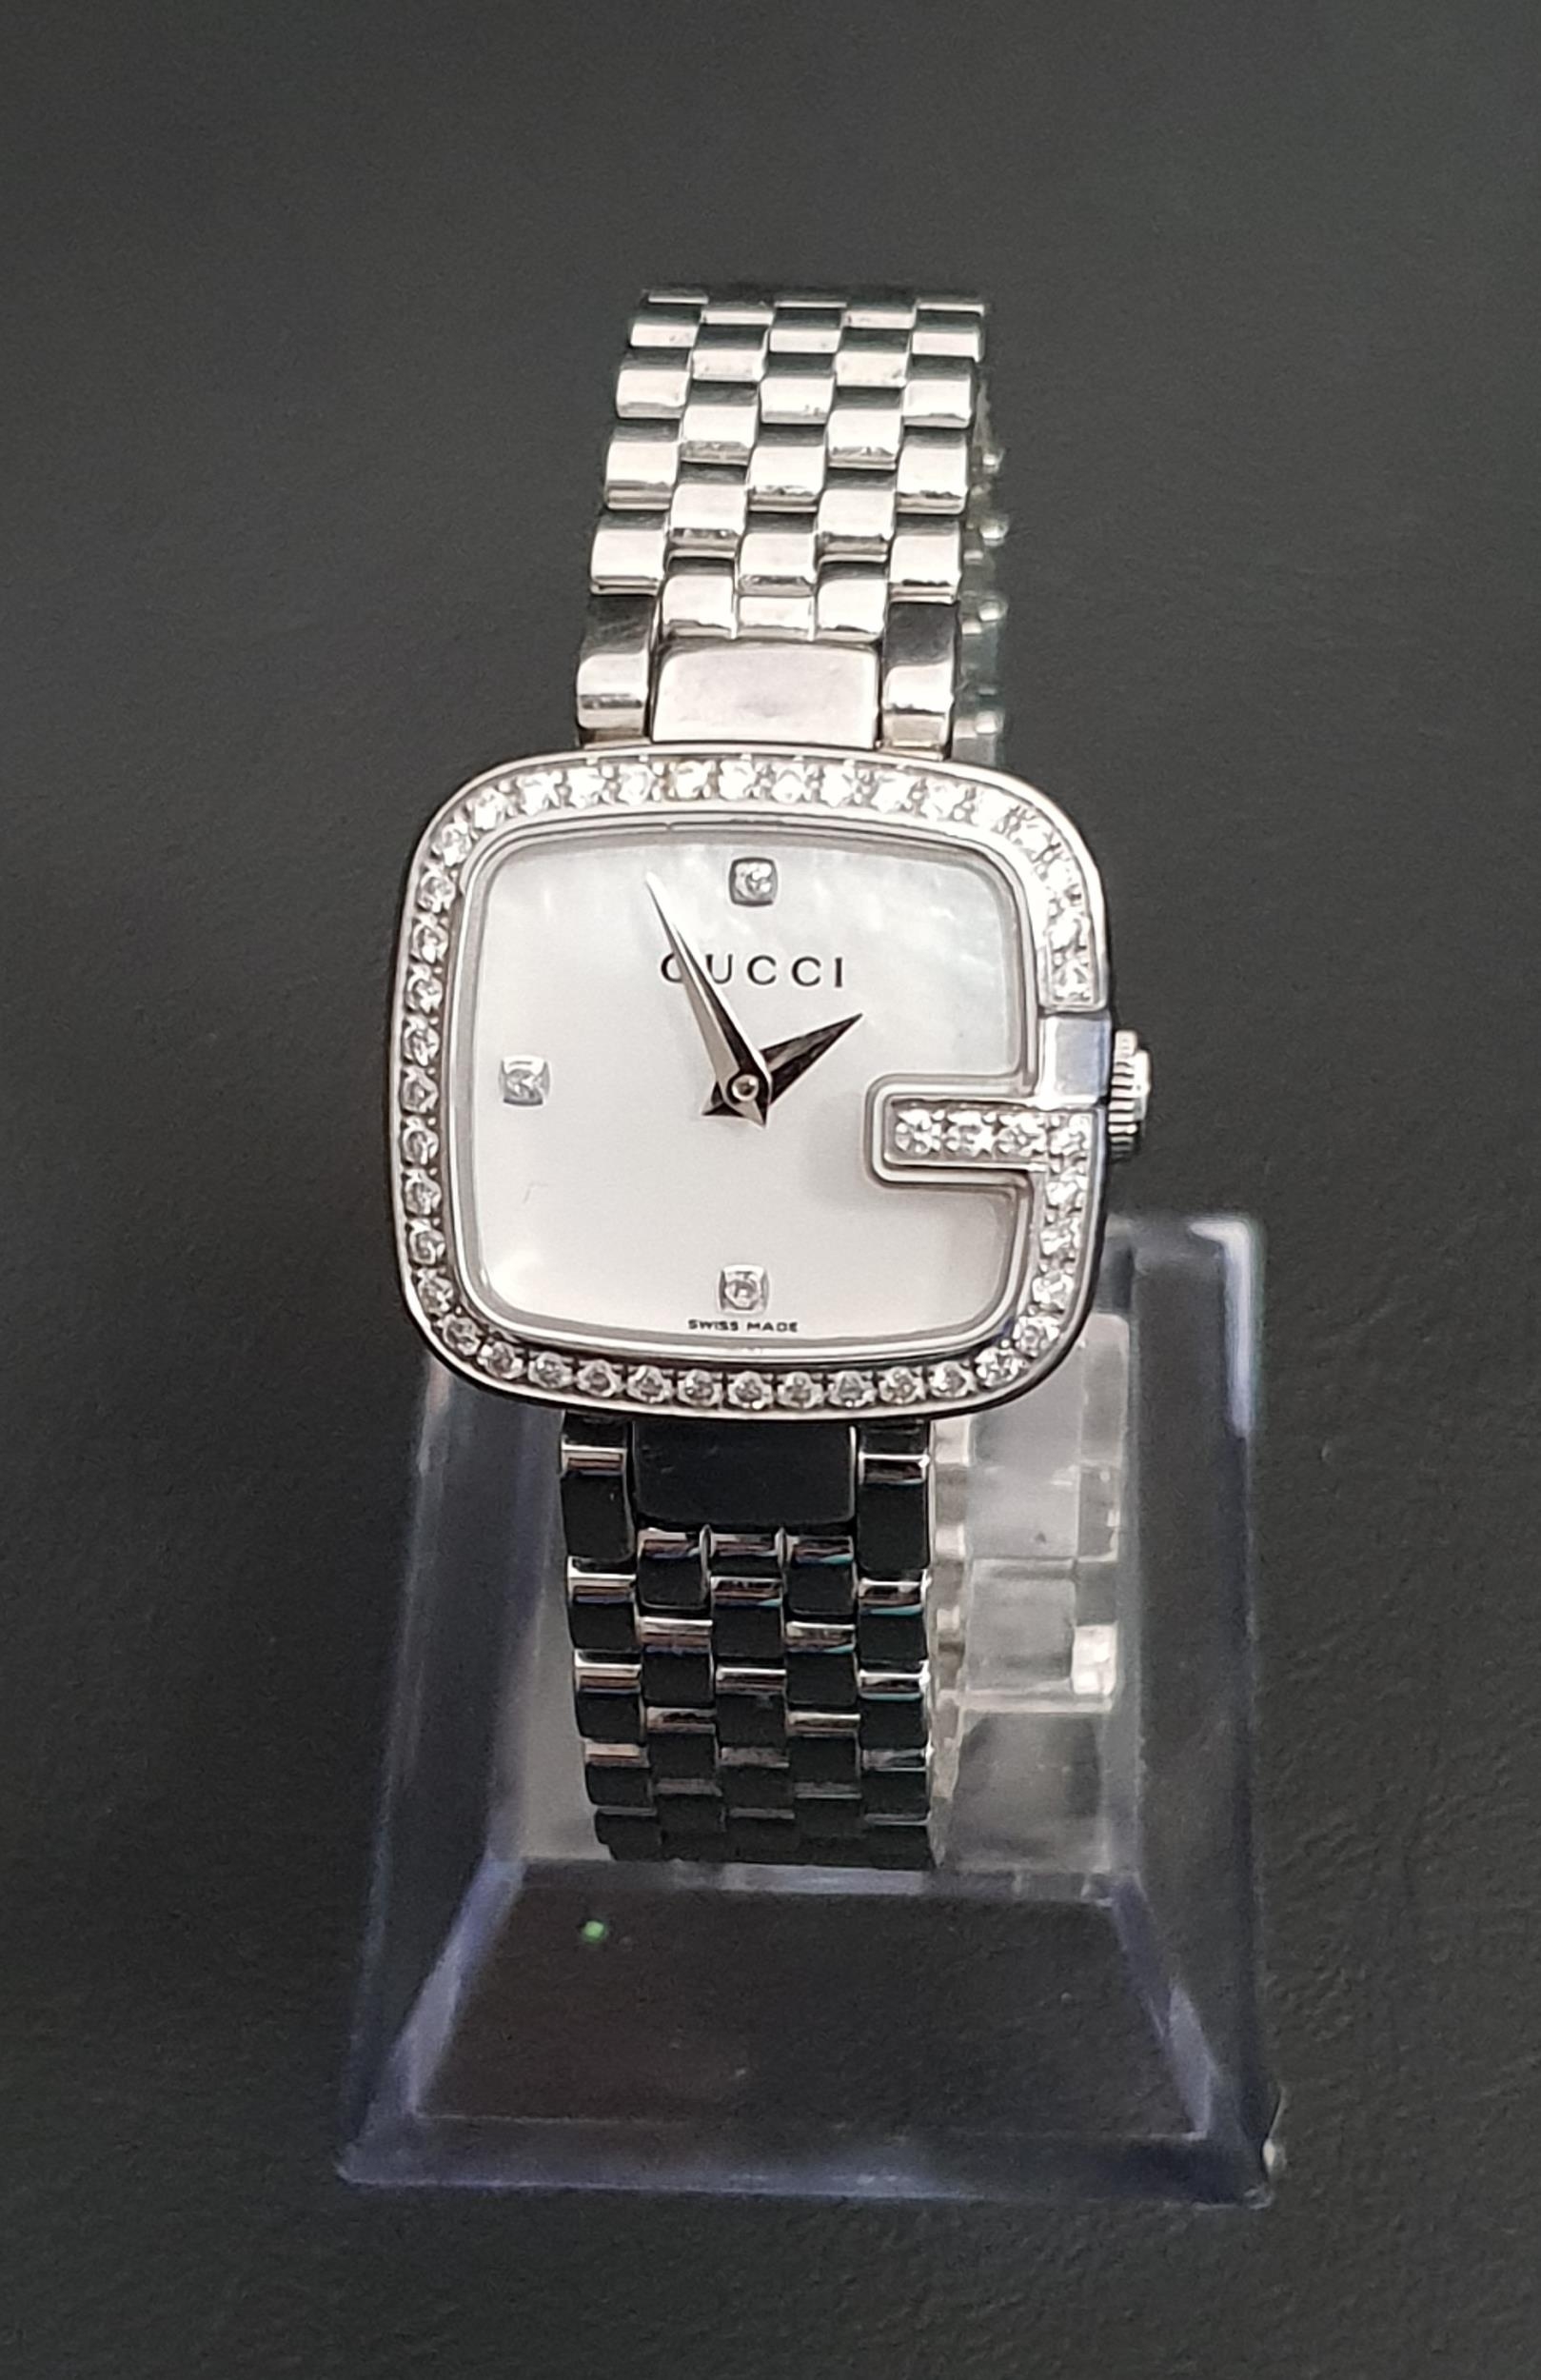 LADIES GUCCI G WRISTWATCH with crystal set bezel, model number 125.5, the backplate also numbered - Image 2 of 2